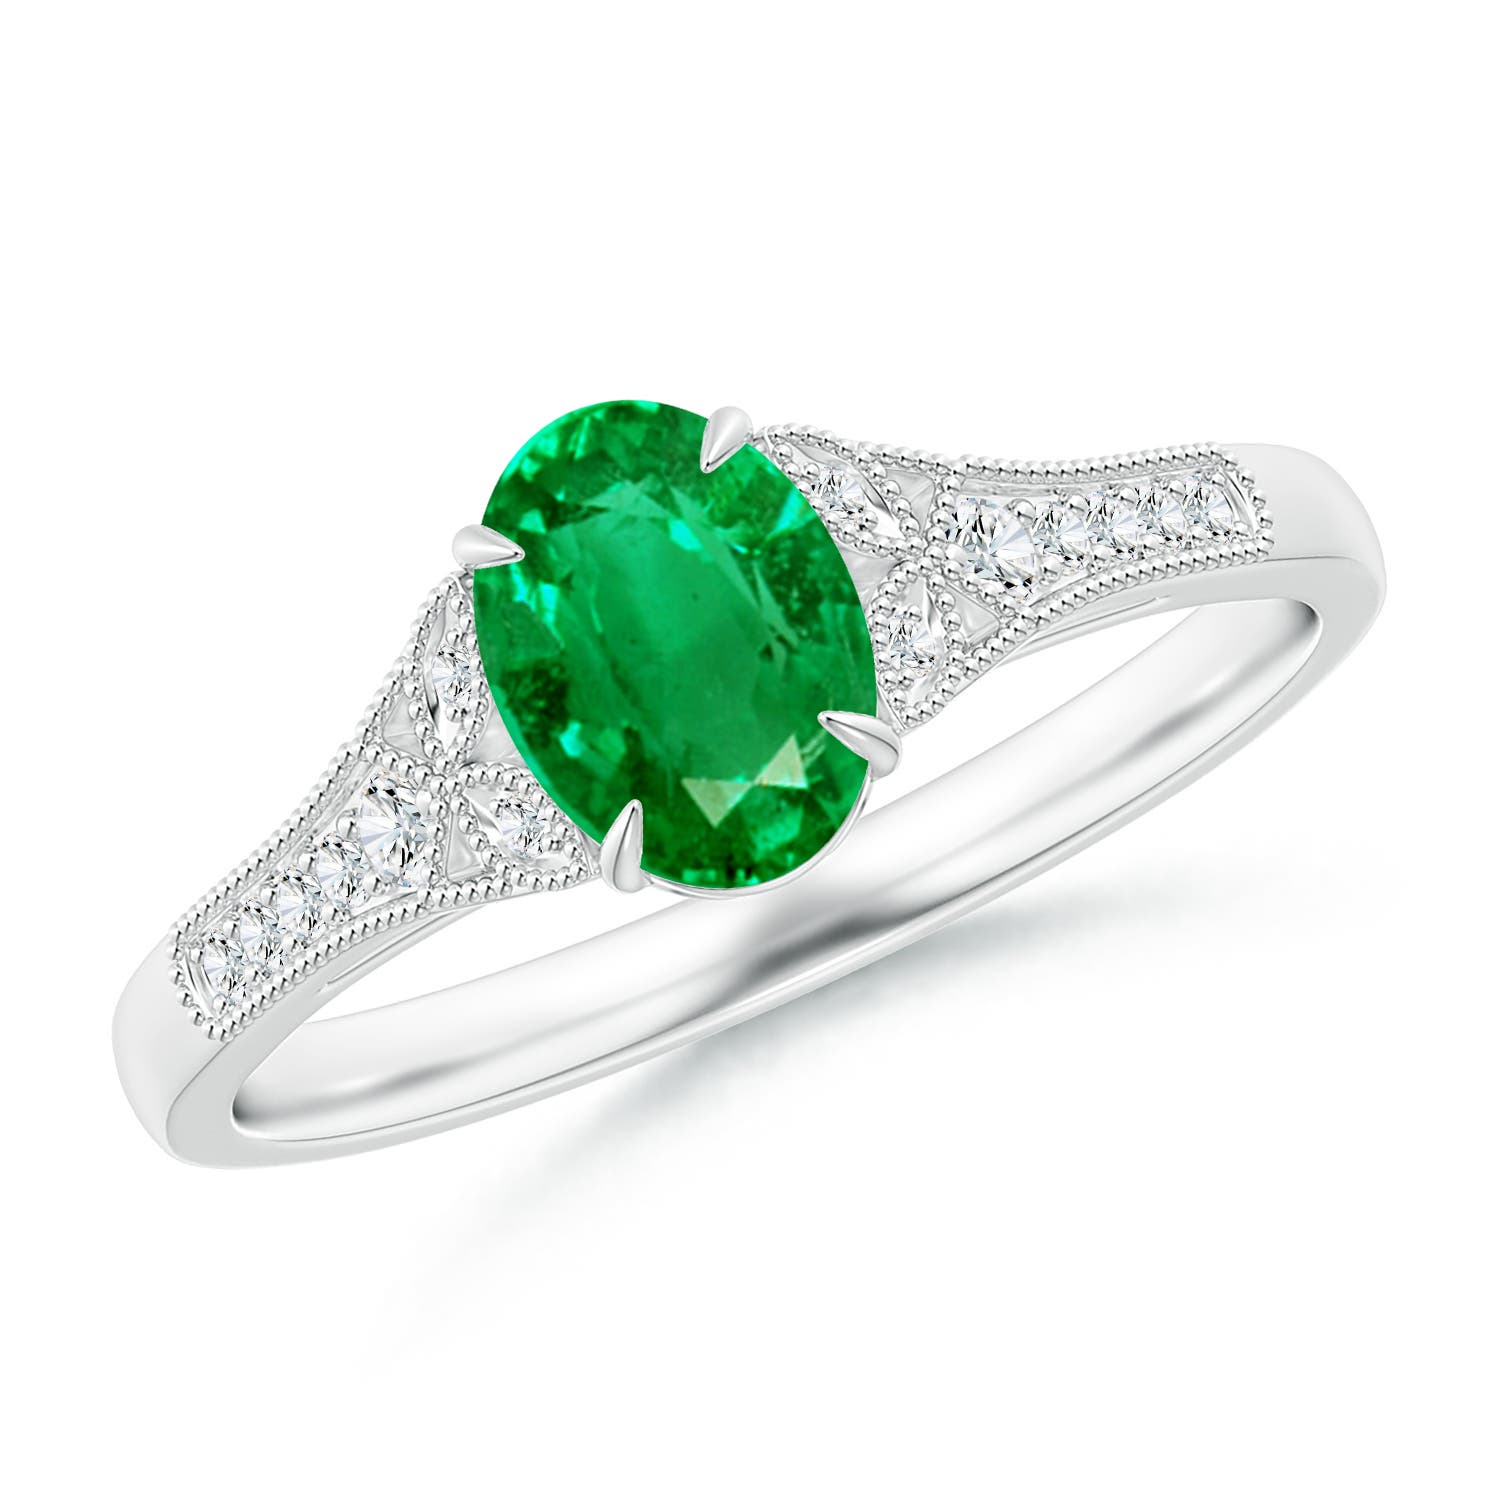 AAA - Emerald / 0.77 CT / 14 KT White Gold